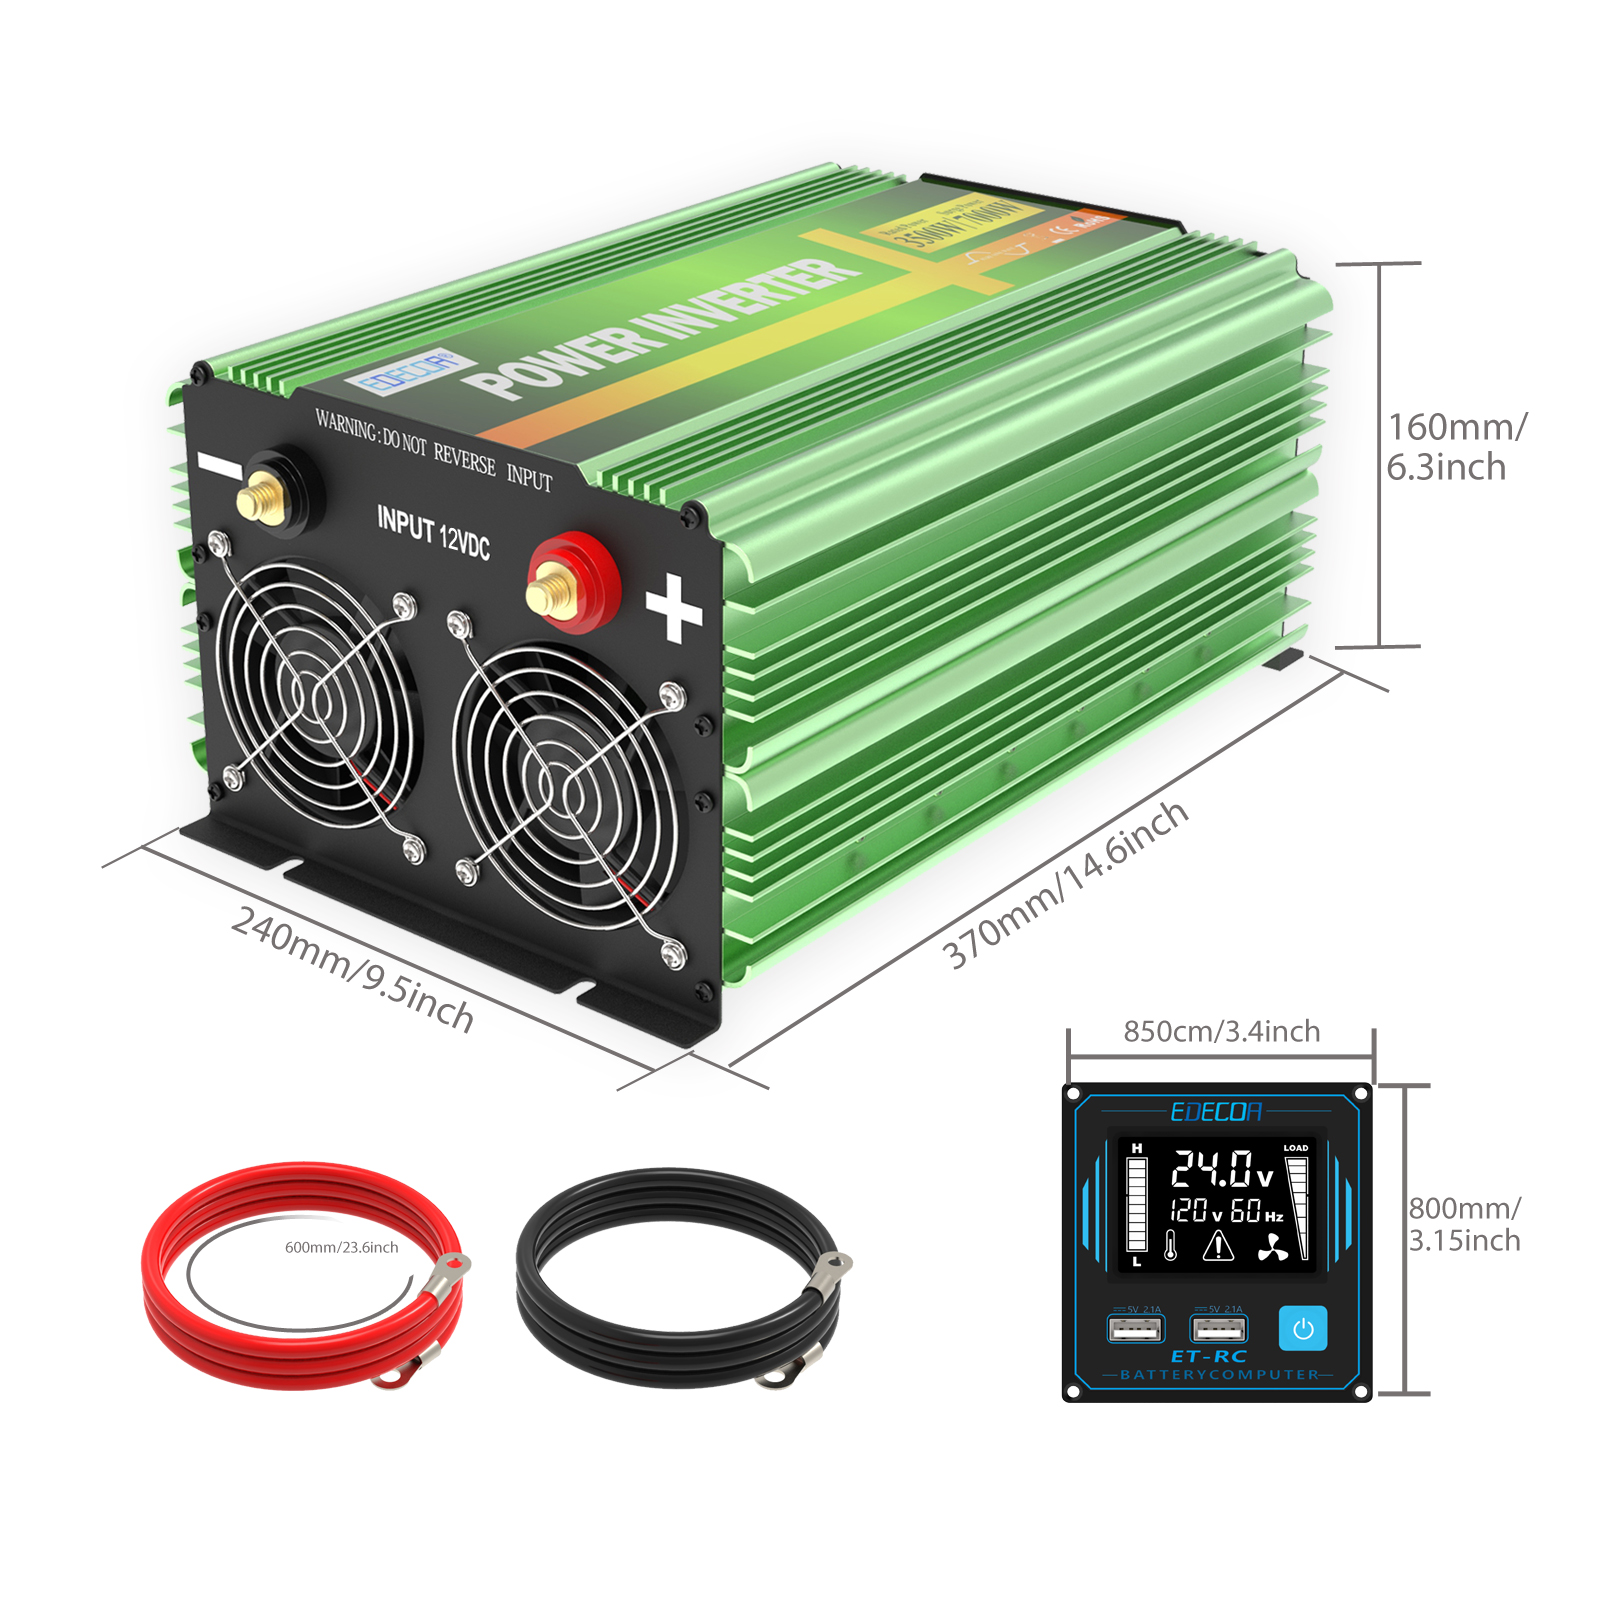 Edecoa 3000W LCD Power Inverter 12V 120V Modified Sine Wave with V3 LCD display 2x USB remote controller Green (4)